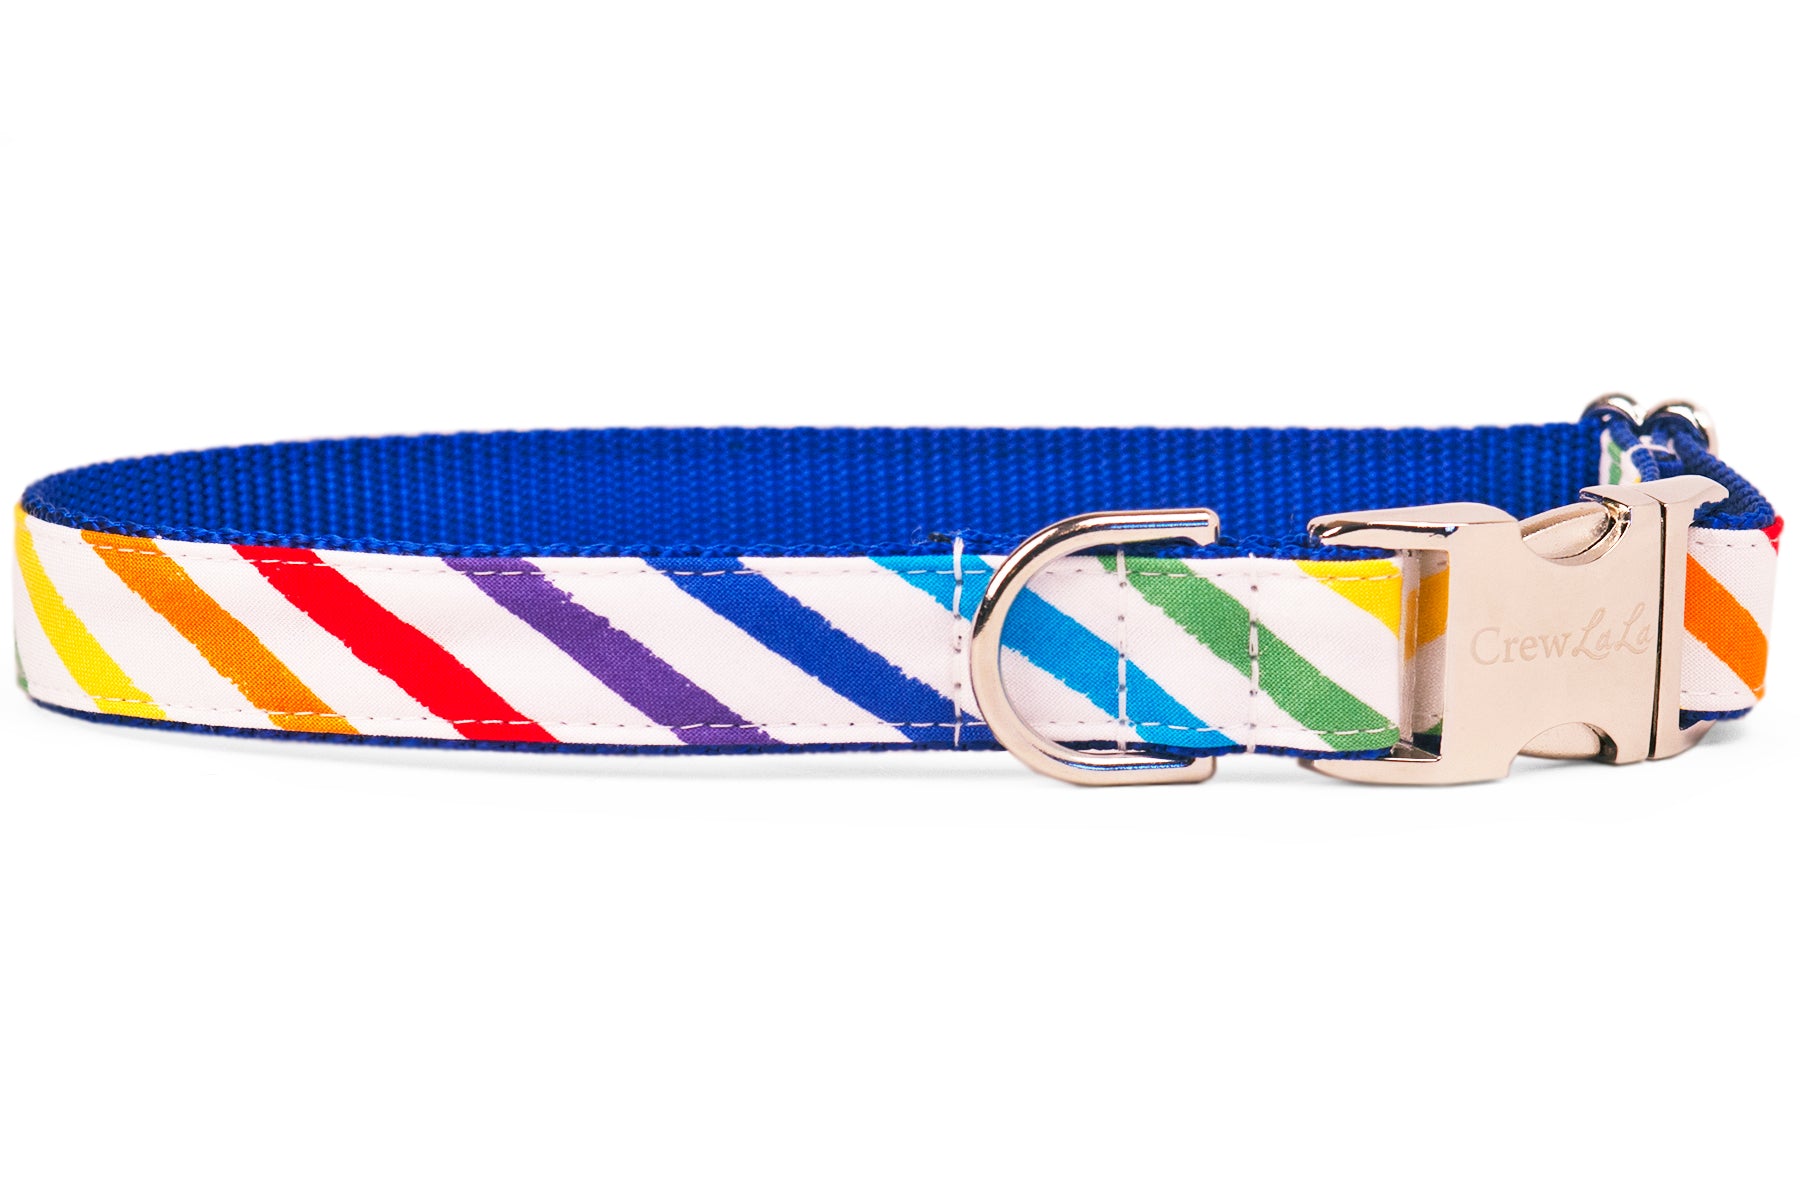 Proud Rainbow Belle Bow™ Dog Collar - Two Styles! - Crew LaLa